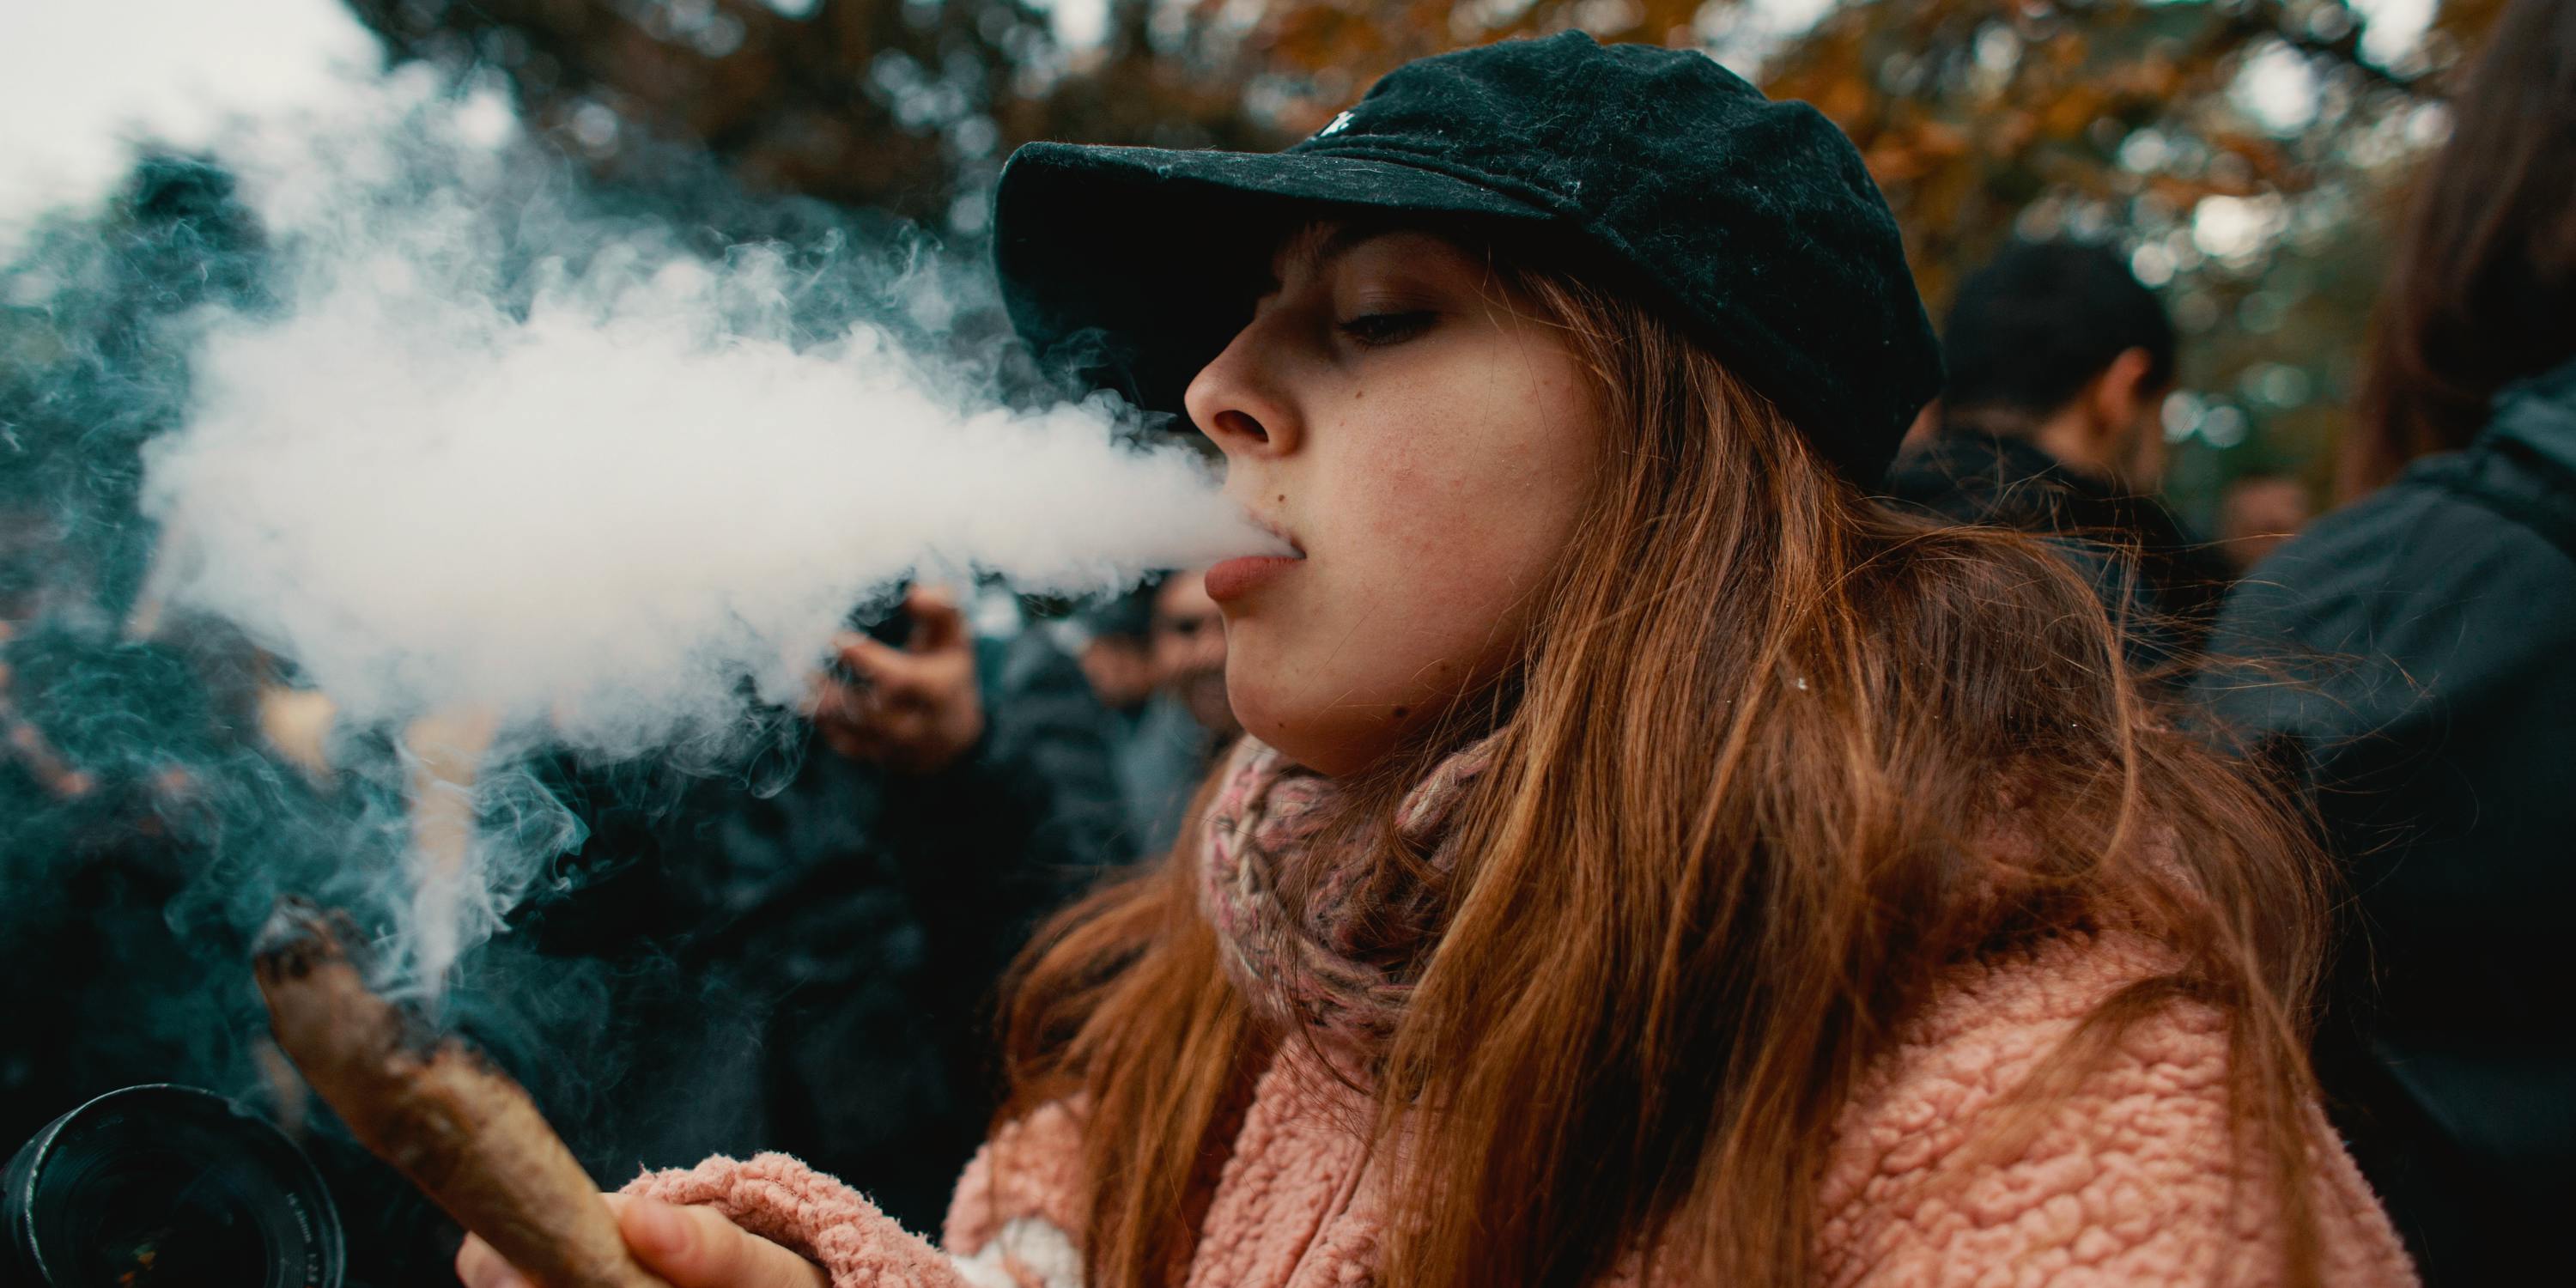 A woman consumes cannabis, to find out how the recent midterms affected legal cannabis, read more here.